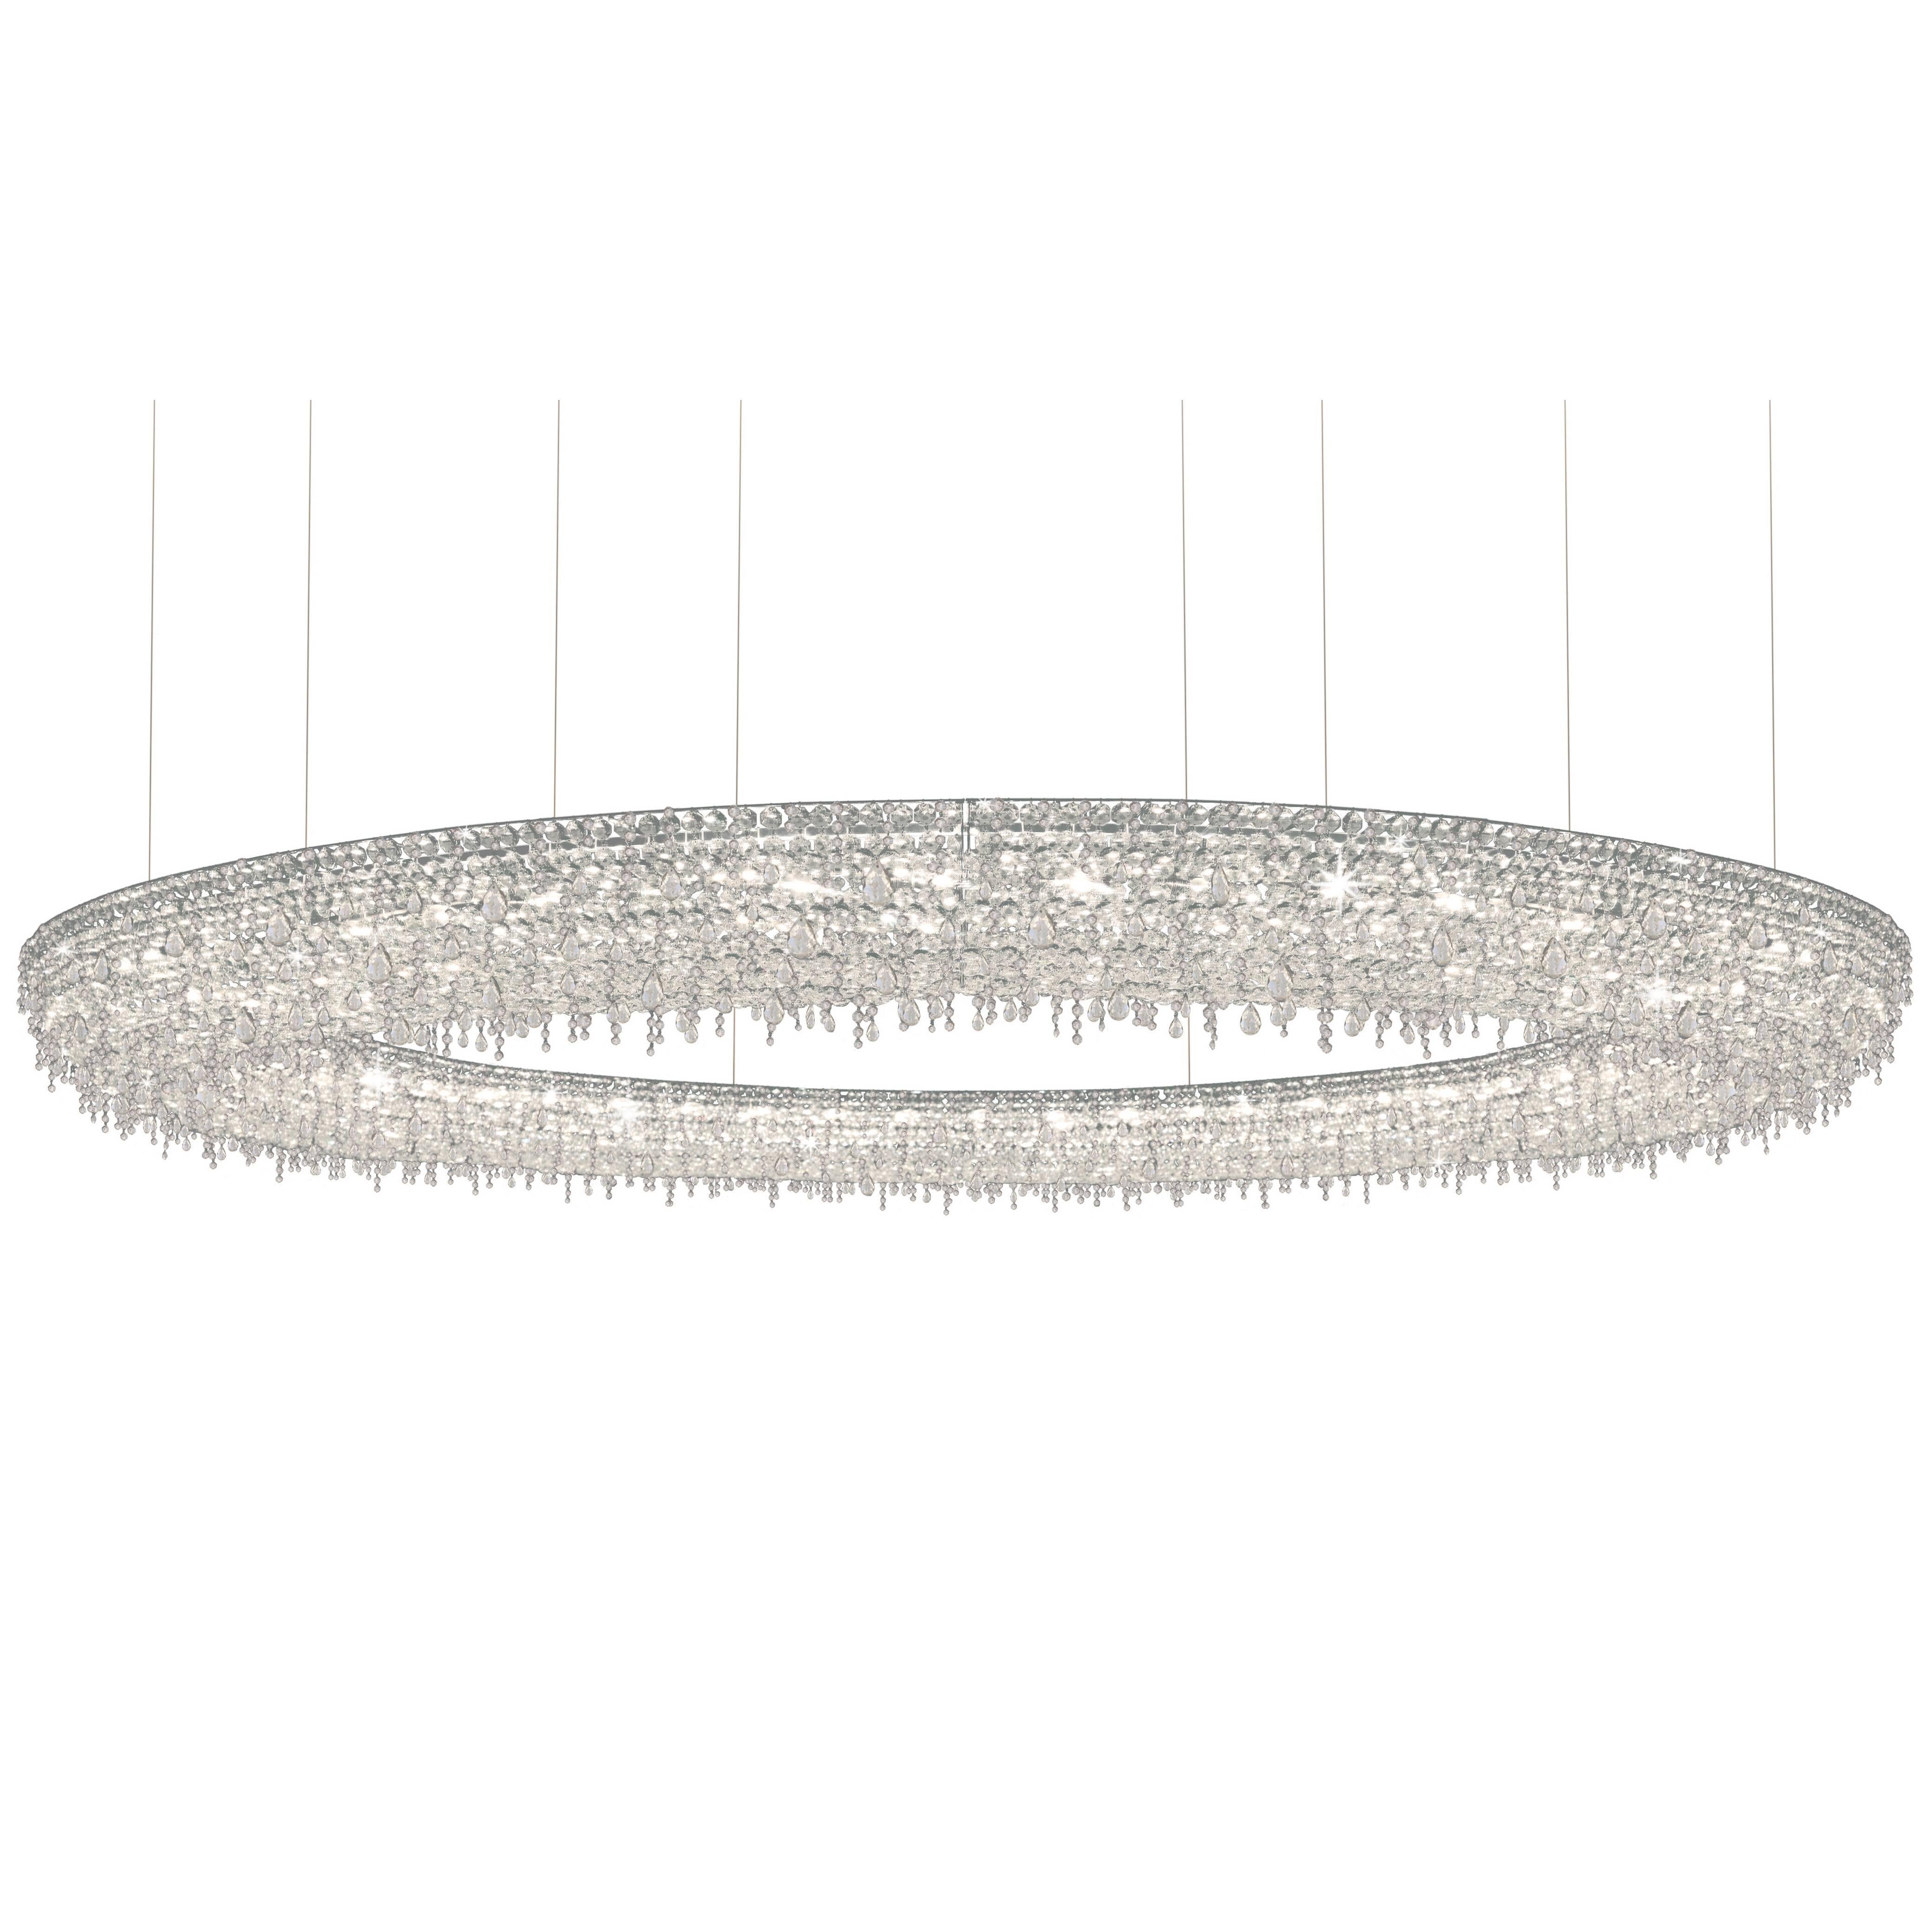 Lolli e Memmoli Ugolino Modern Crystal Halo Light Fixture Handcrafted in Italy For Sale